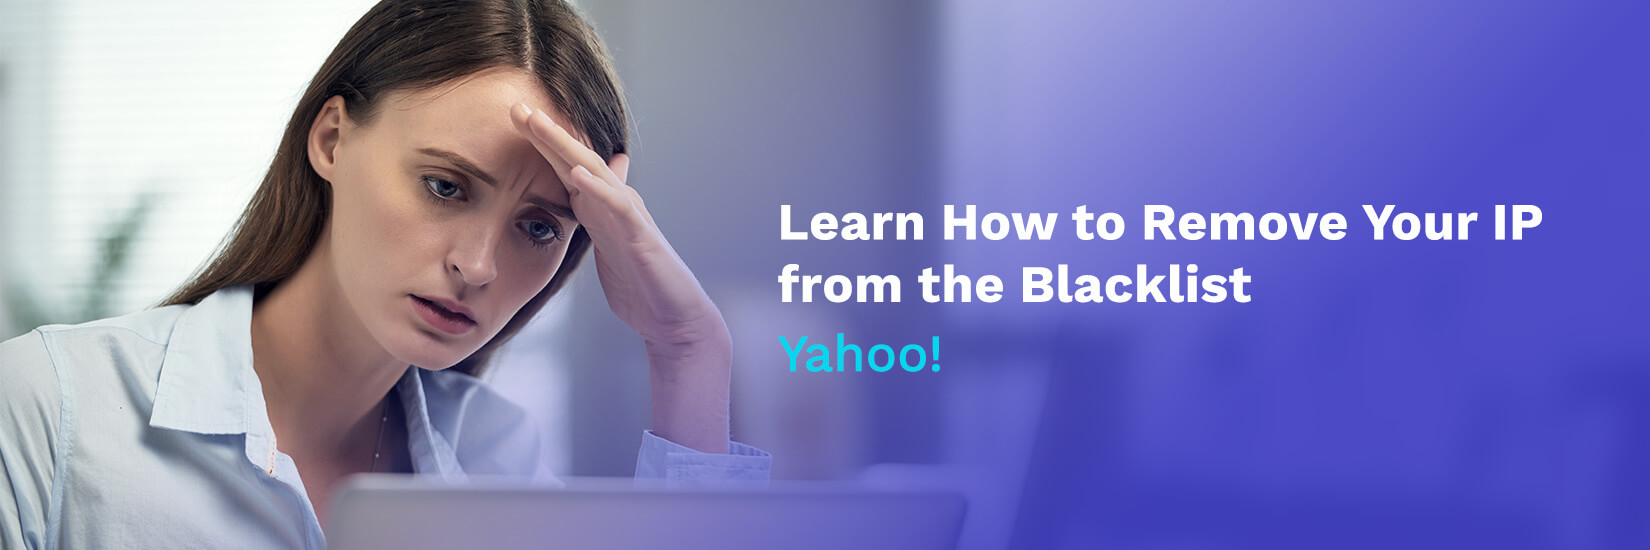 How to Remove Your IP Address from the Yahoo!'s Blacklist